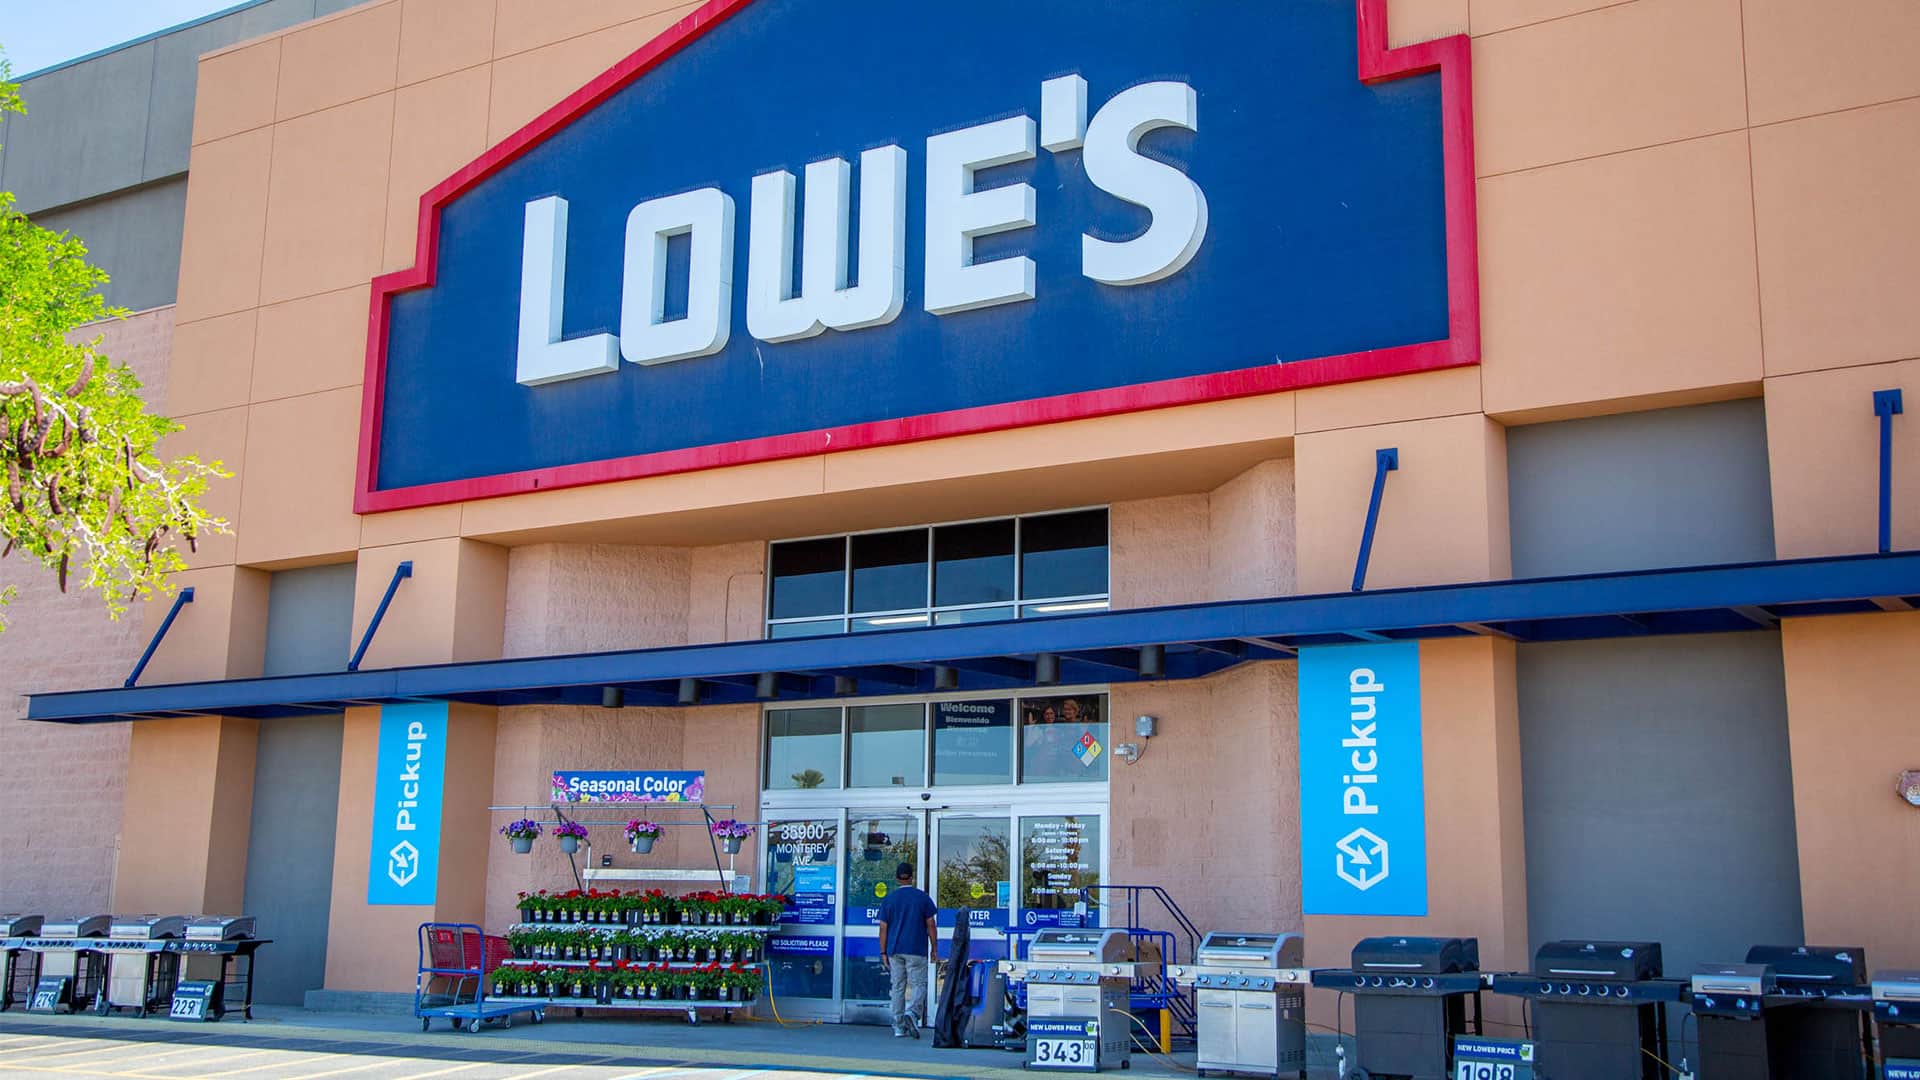 Best Ways to Save While Shopping at Lowe's